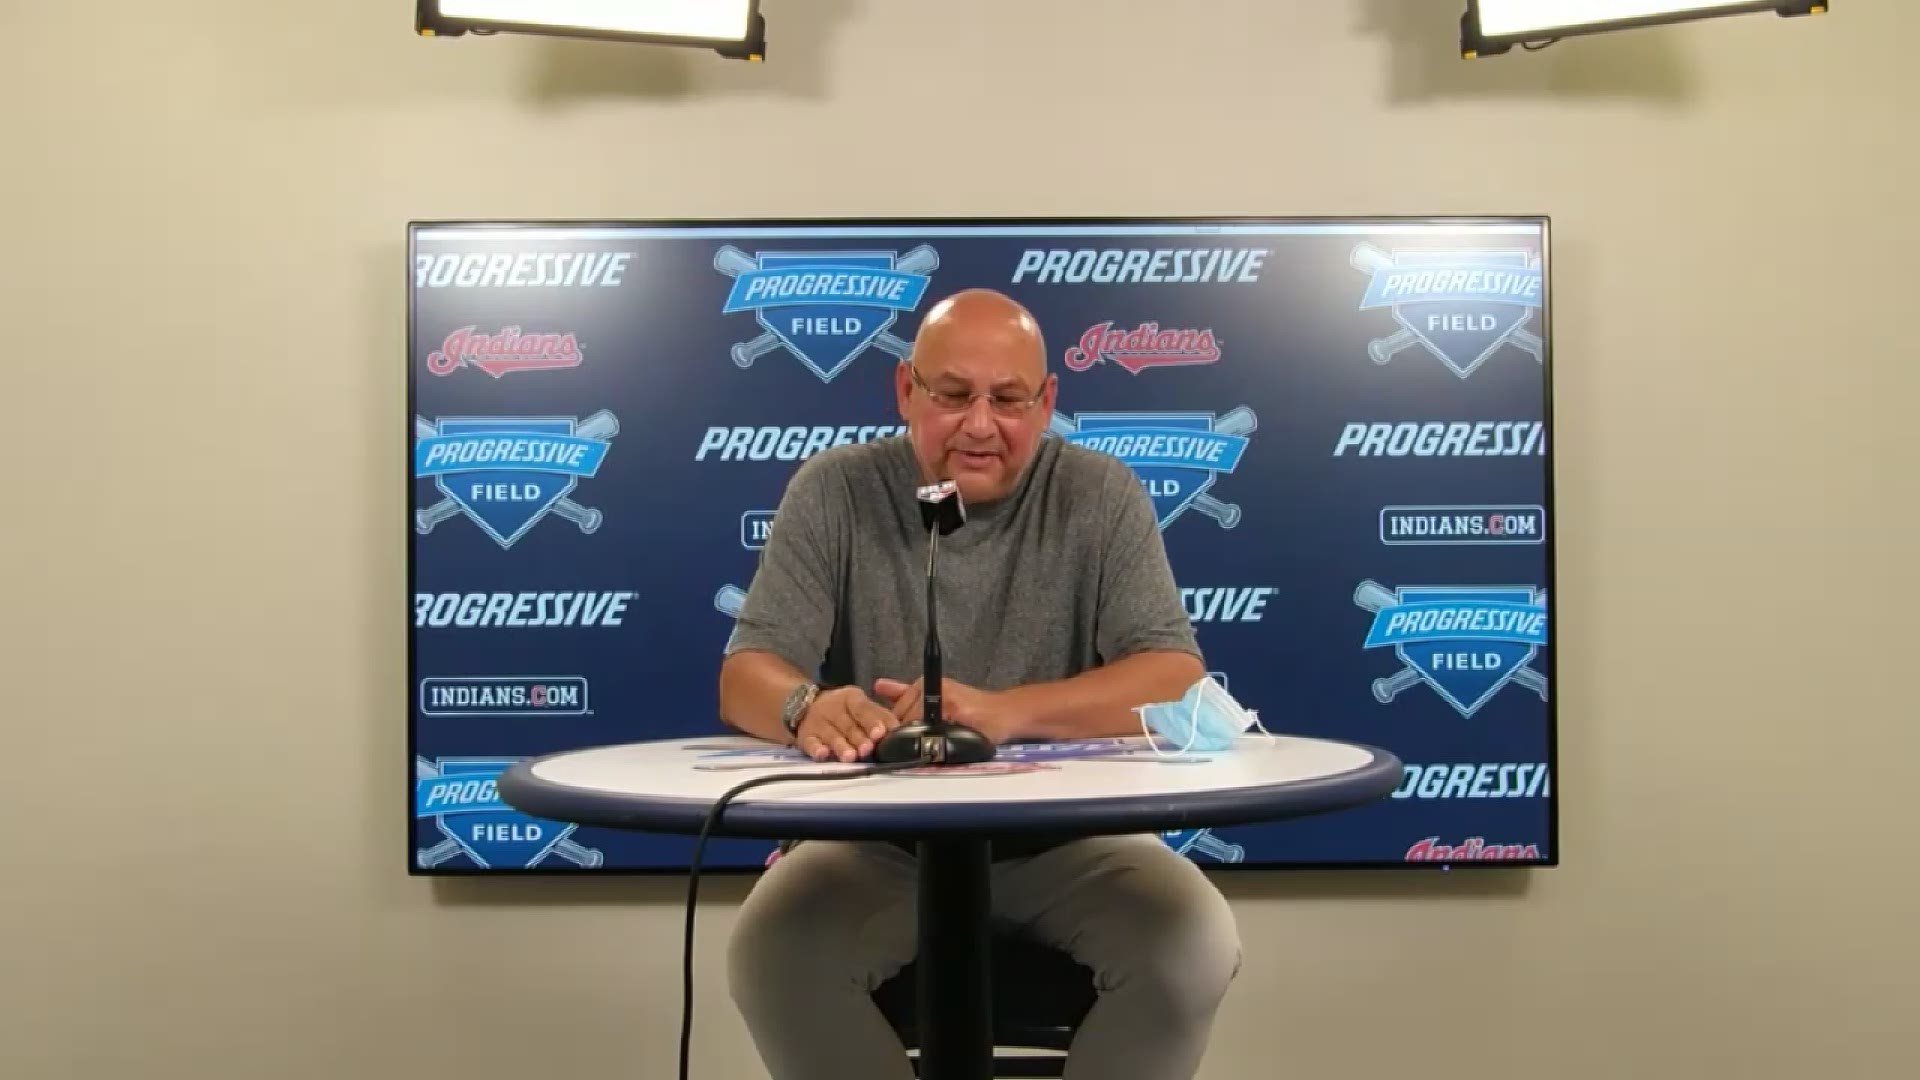 Francona revealed that he has been dealing with several health issues since Spring Training. He left the Indians during their recent road trip.